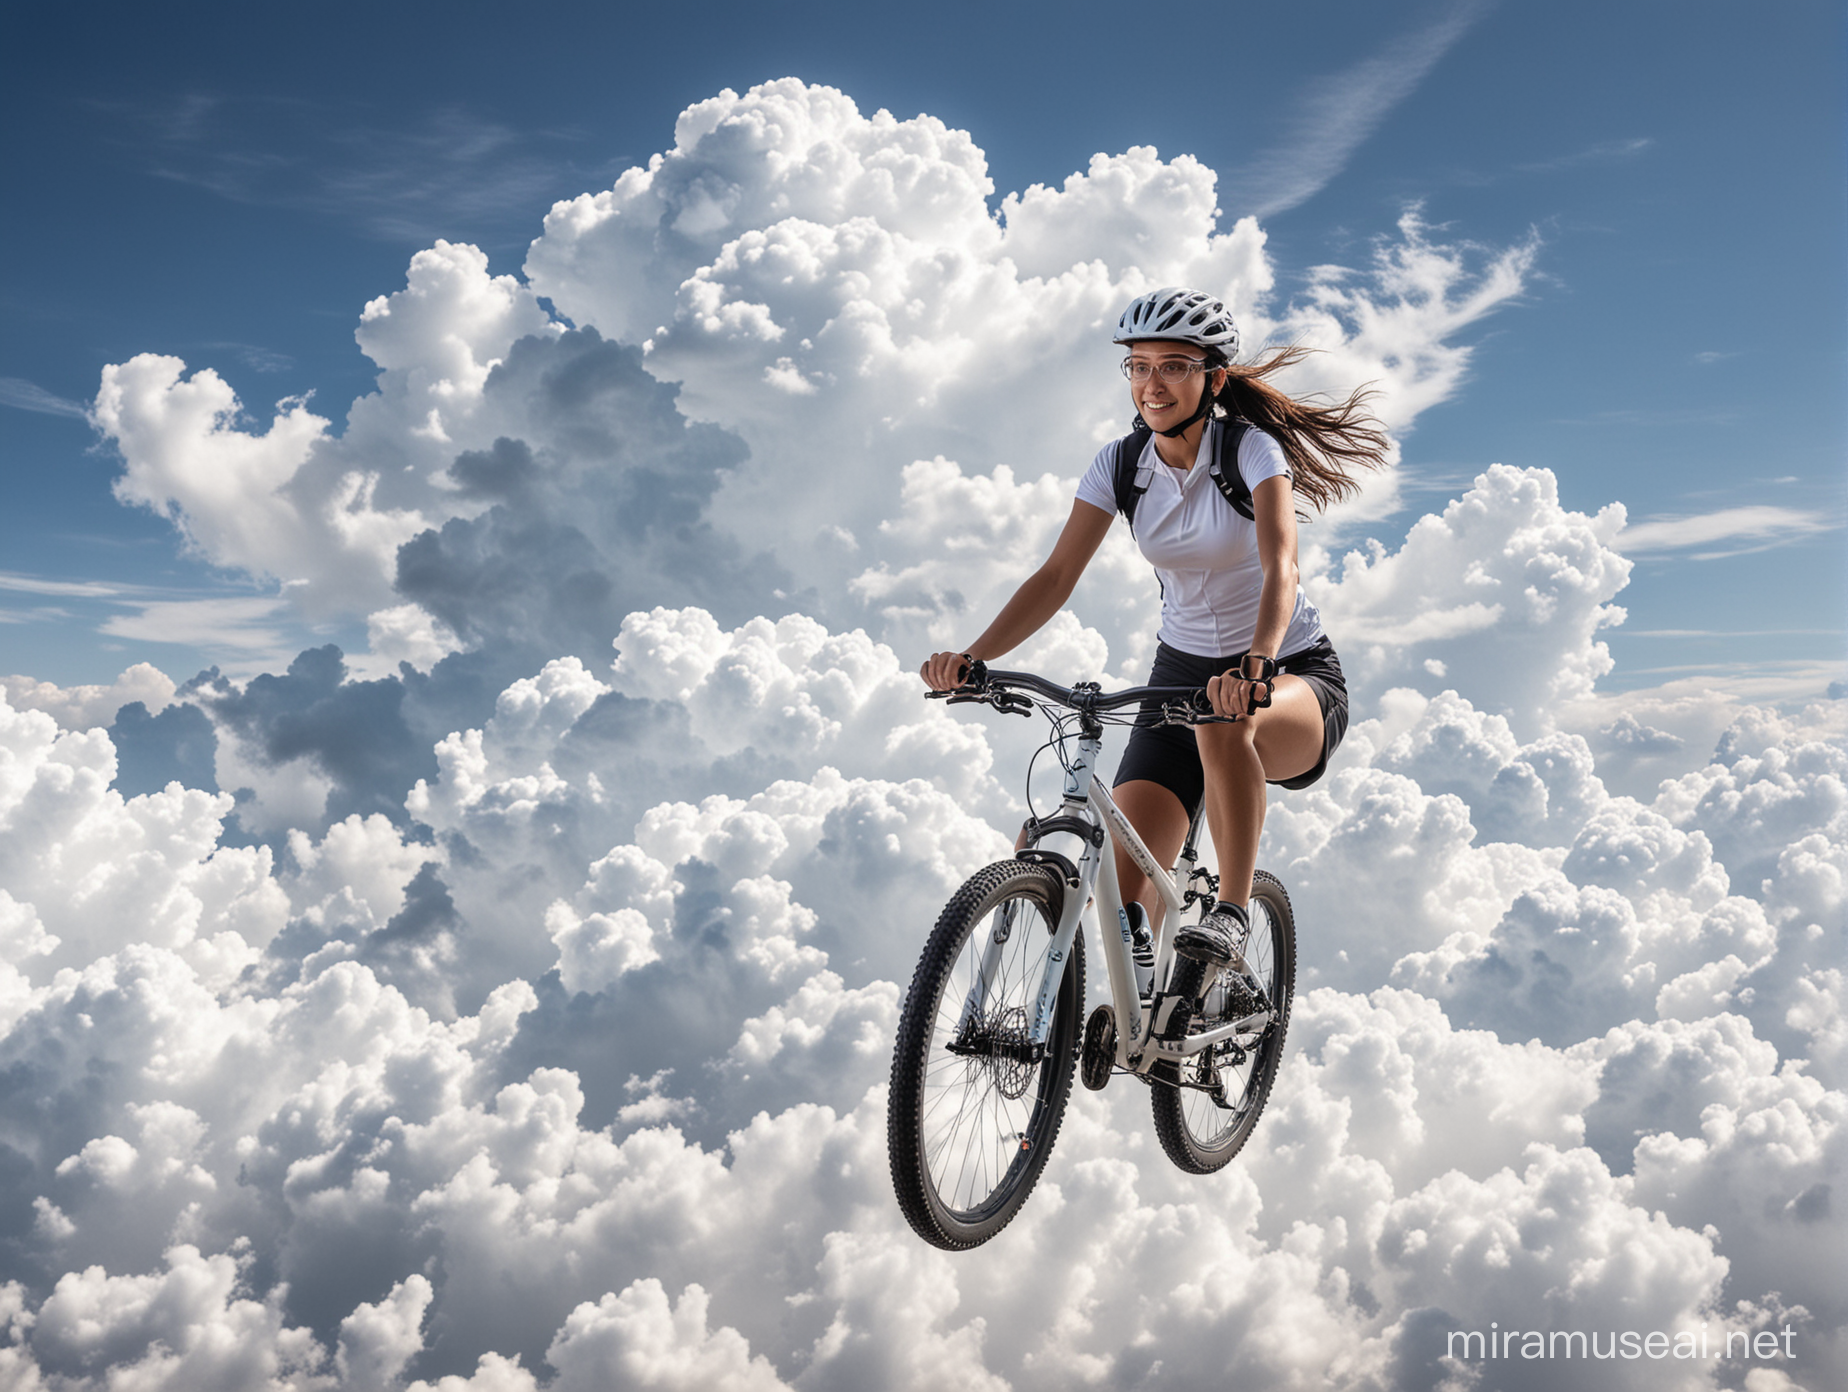 a sportive girl riding her mountainbike on a white cloud